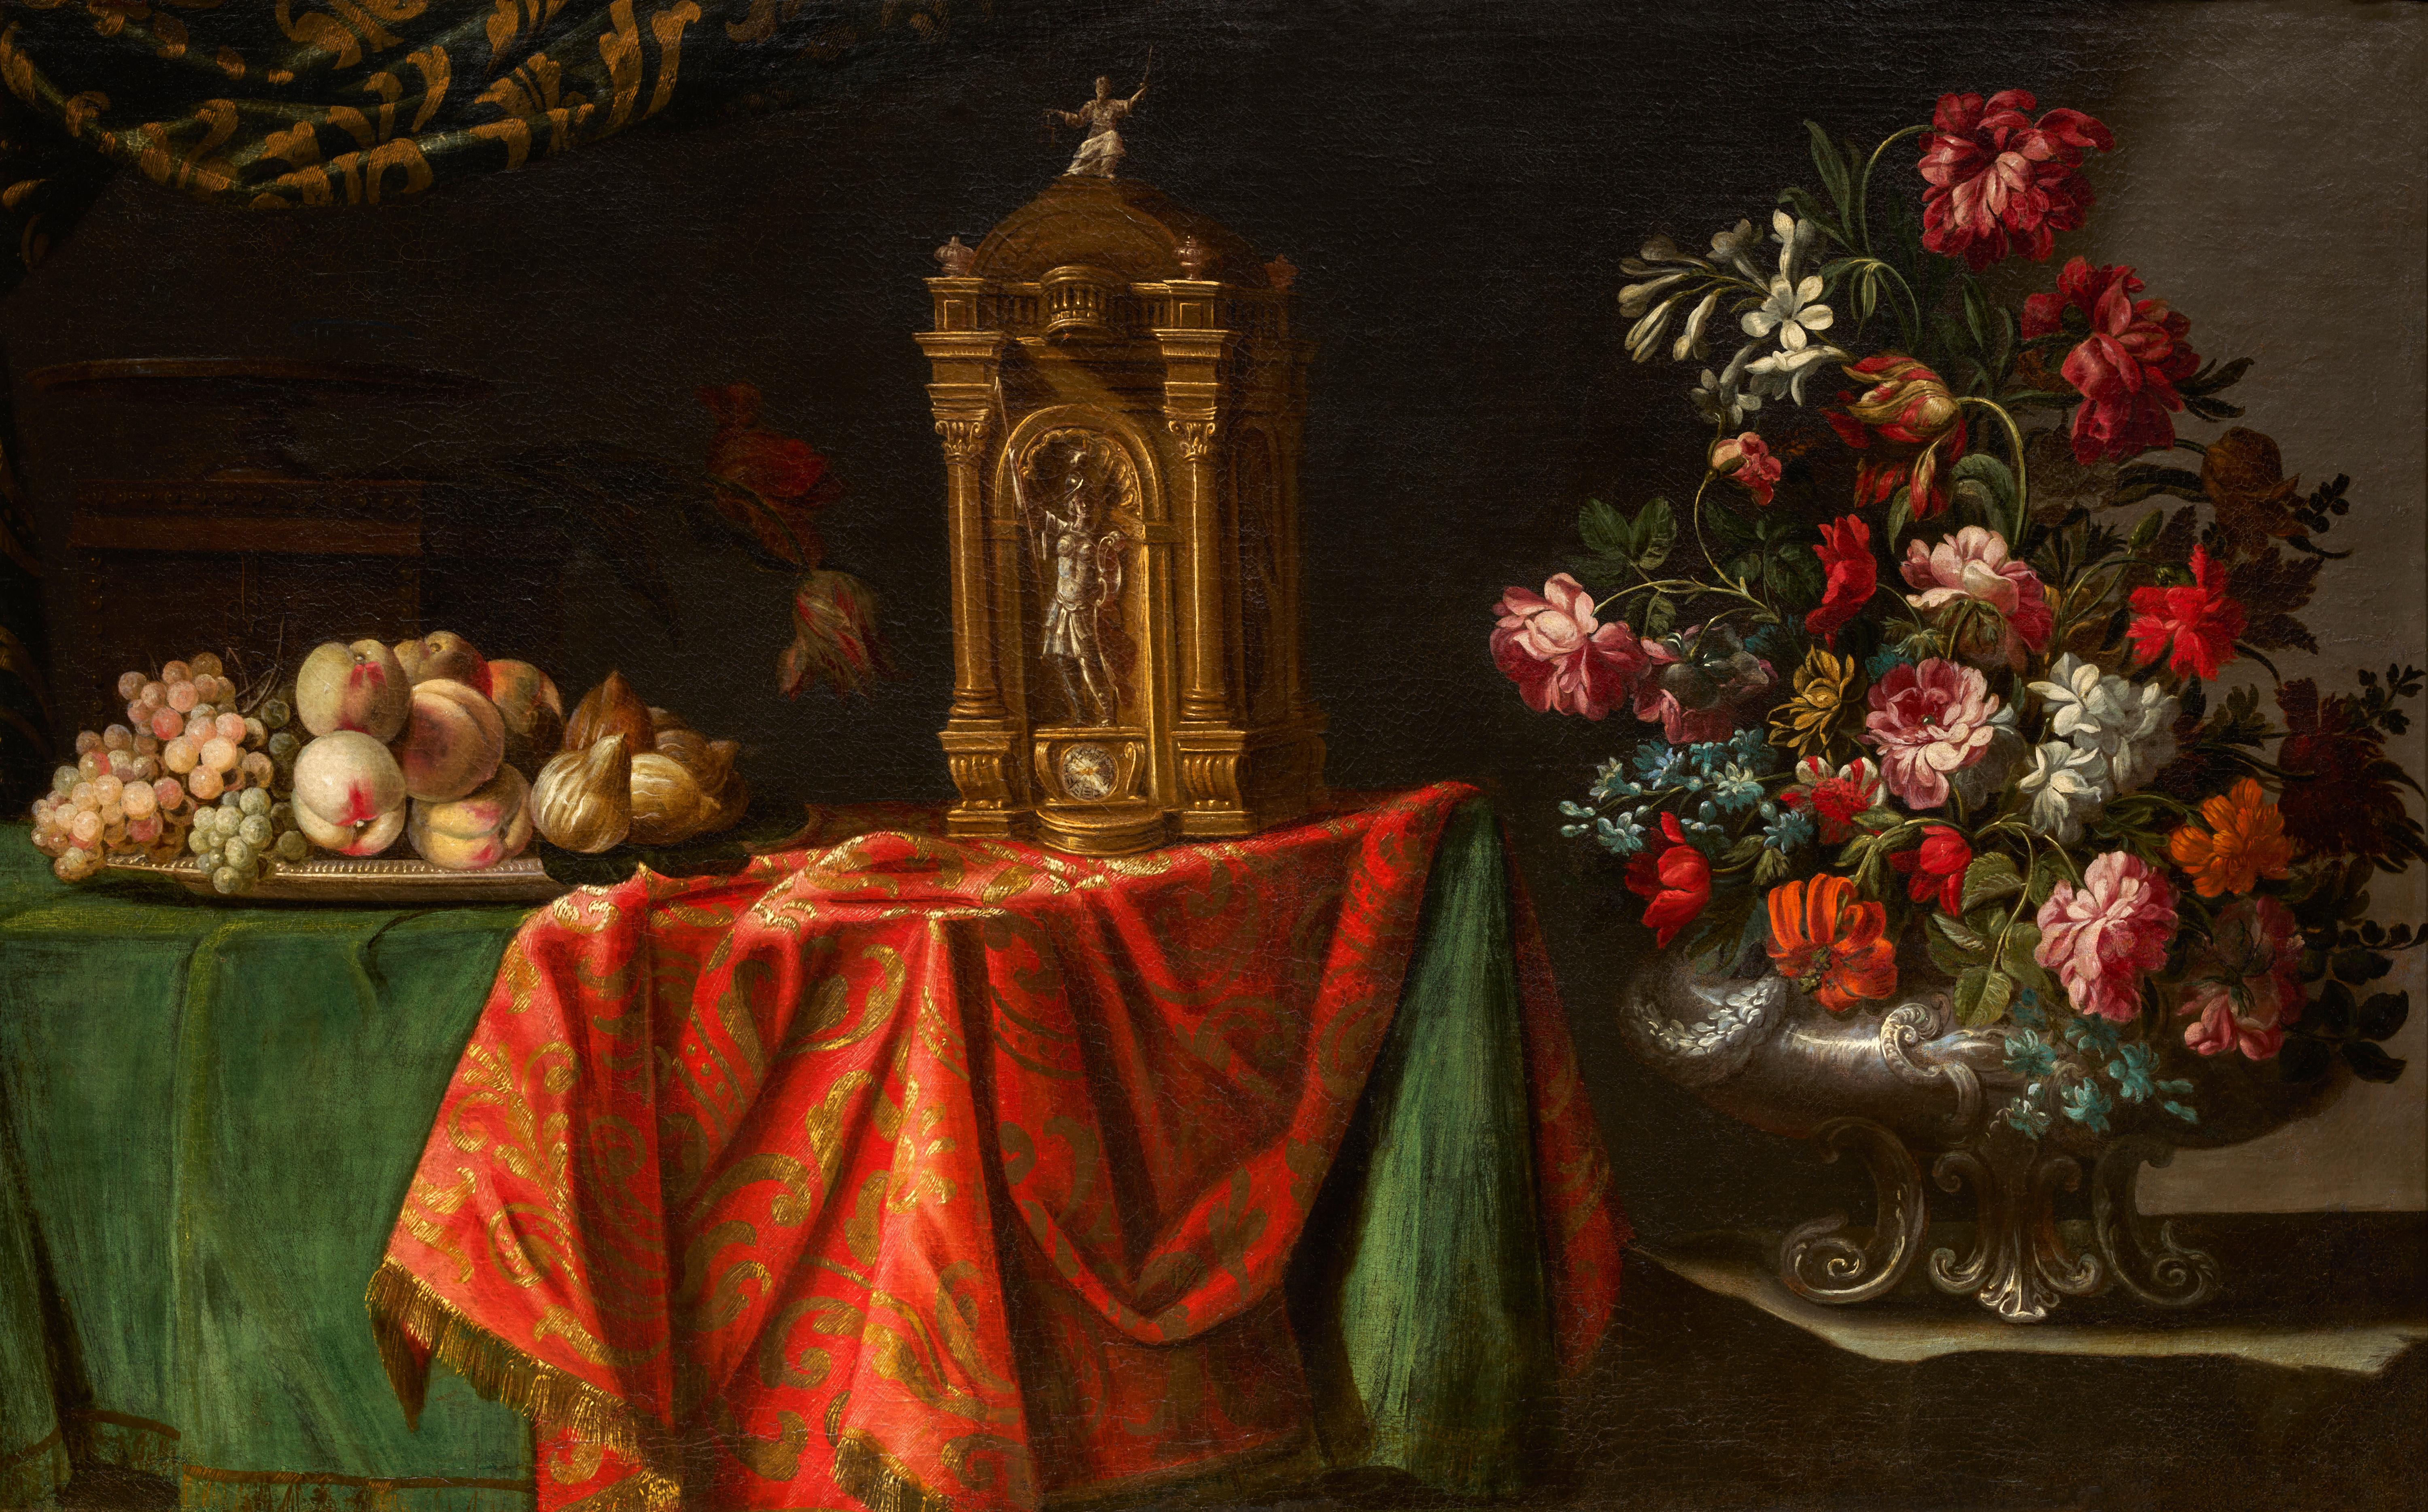 Baroque silver Vase with Flowers with a Fruit Tray and a Clock by A. Zuccati  - Painting by Adeodato Zuccati